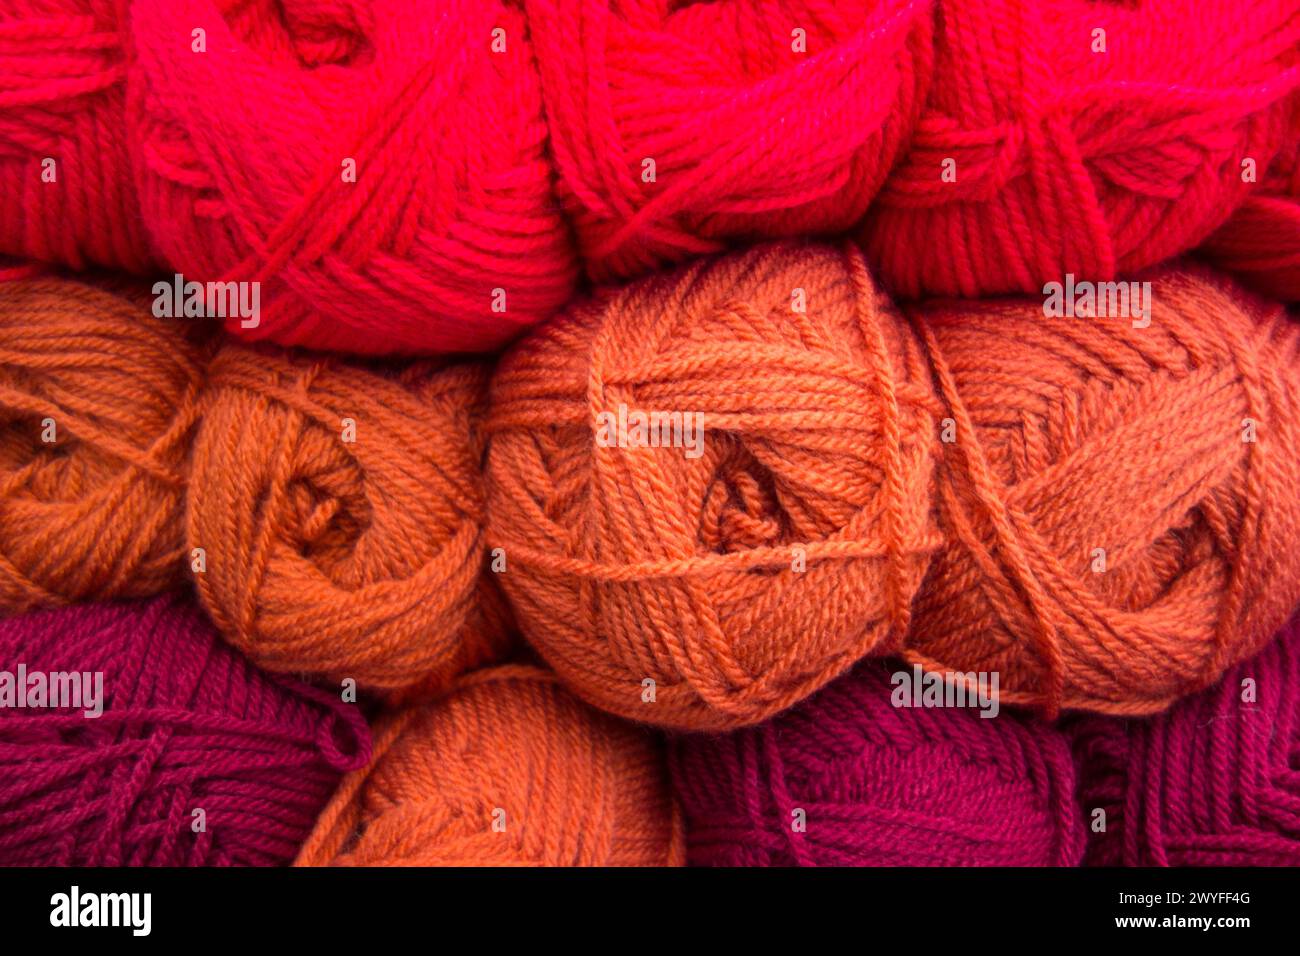 Close-up of colourful orange, red and purple balls of wool Stock Photo